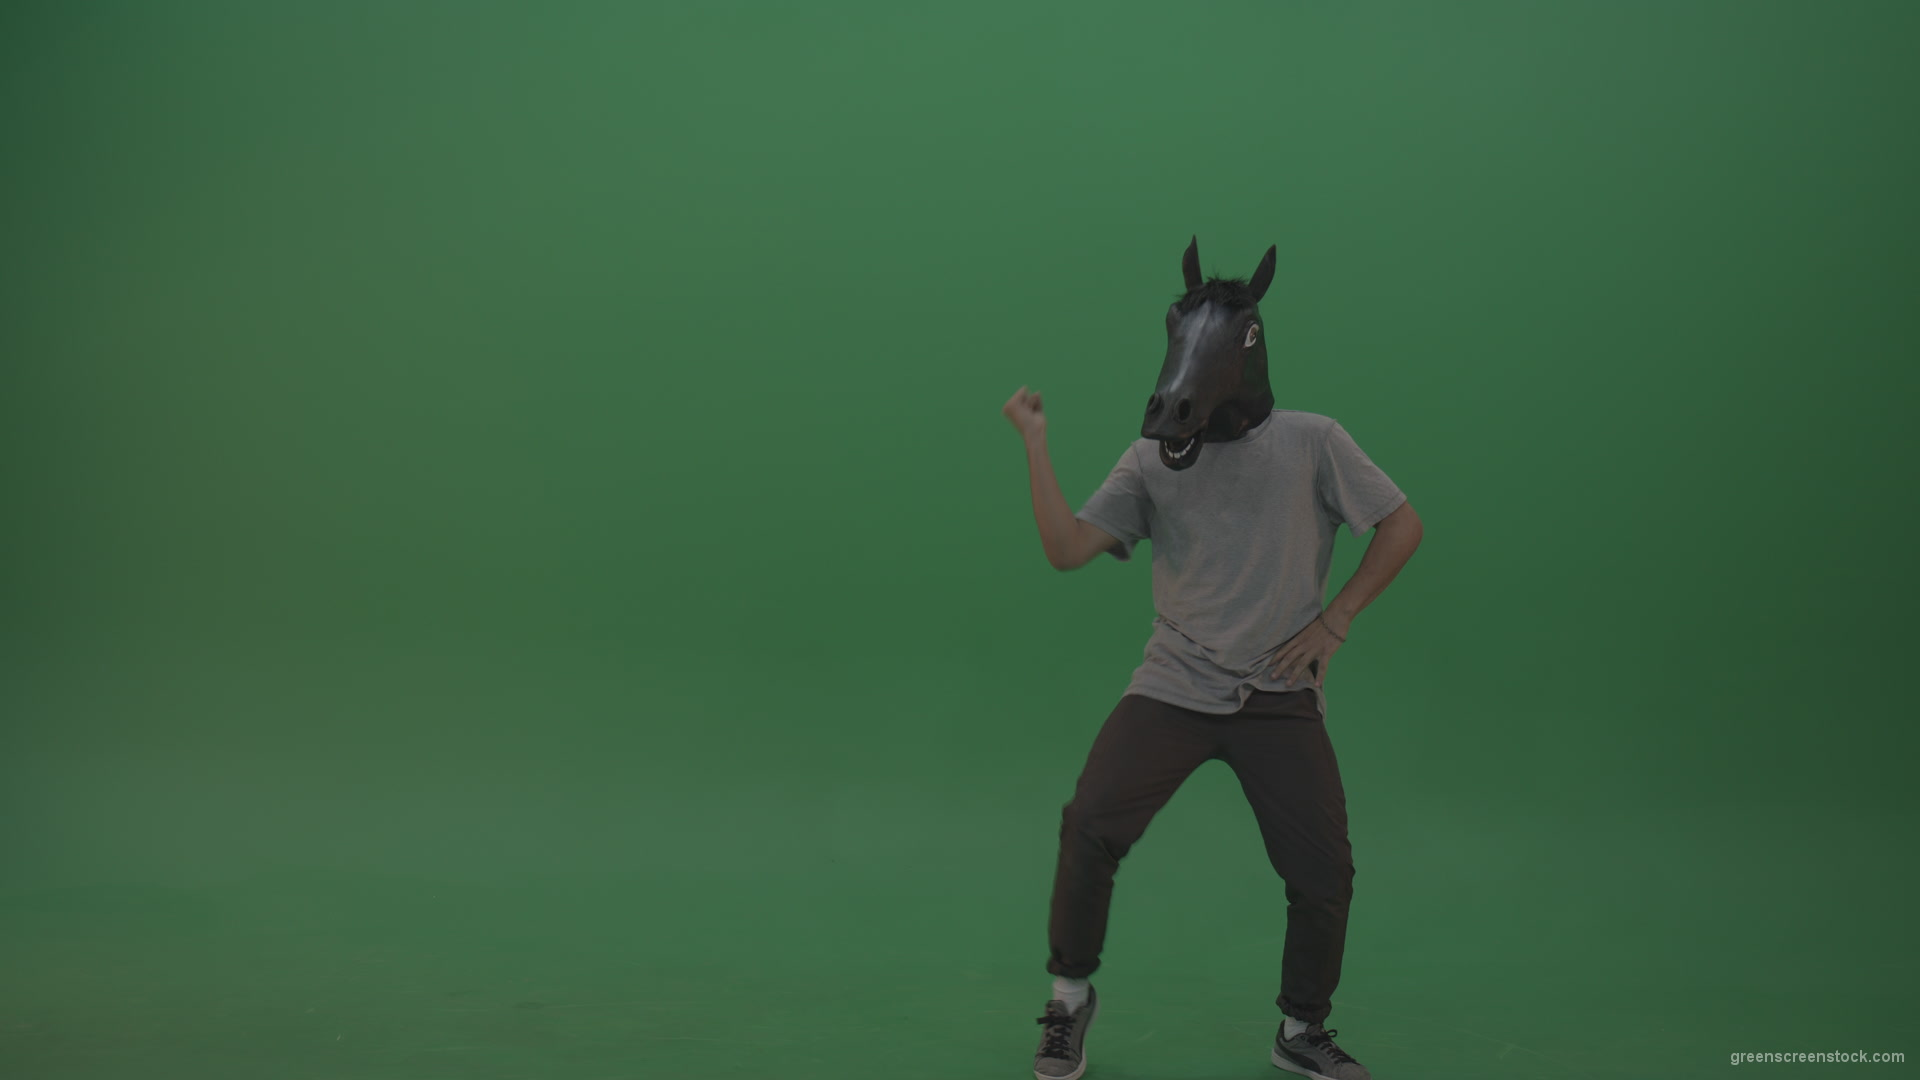 Boy-in-grey-wear-and-horse-head-costume-dances-over-green-screen-background_002 Green Screen Stock